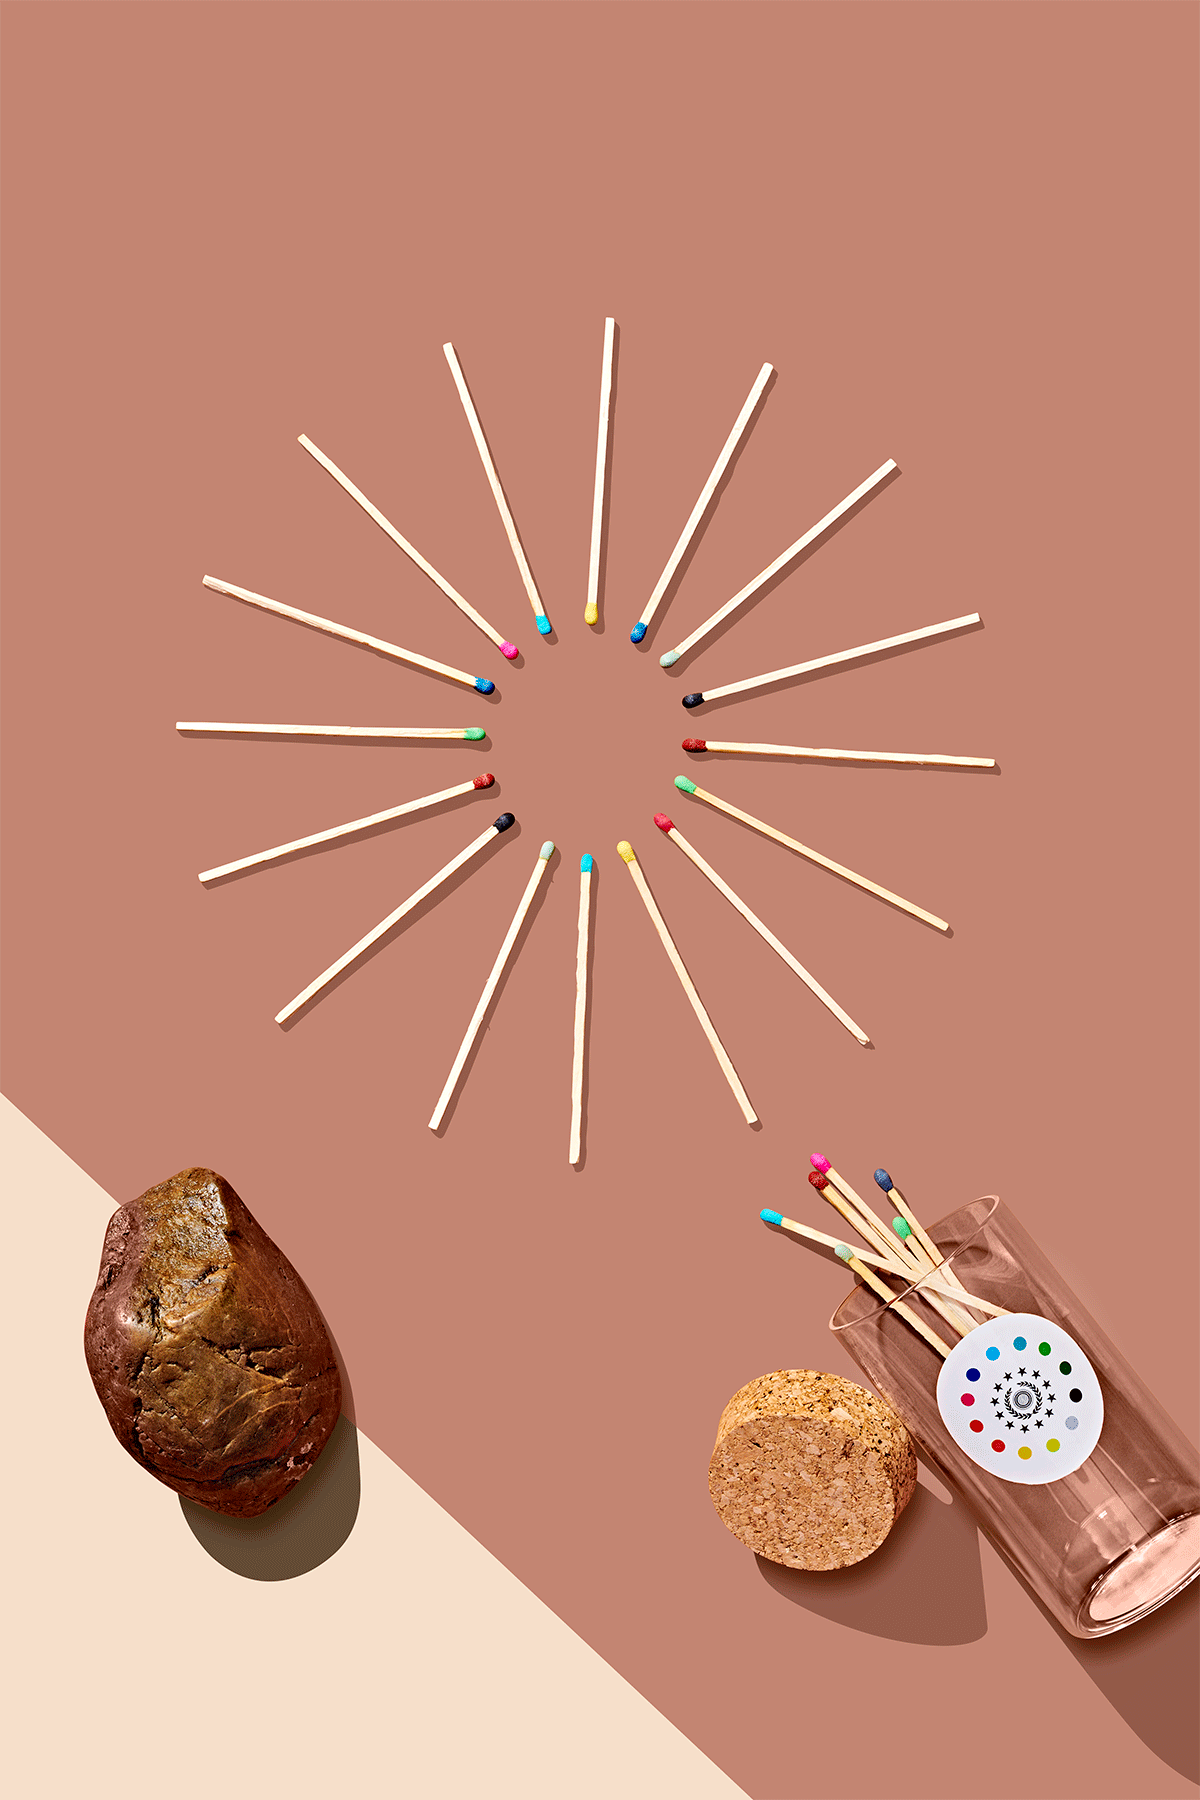 A glass jar of matches with multicolored heads sits next to a circular pattern of matches which appear and disappear one by one. This is part of the 2019 Holiday Gift Guide for Curbed. This is an animated gif.